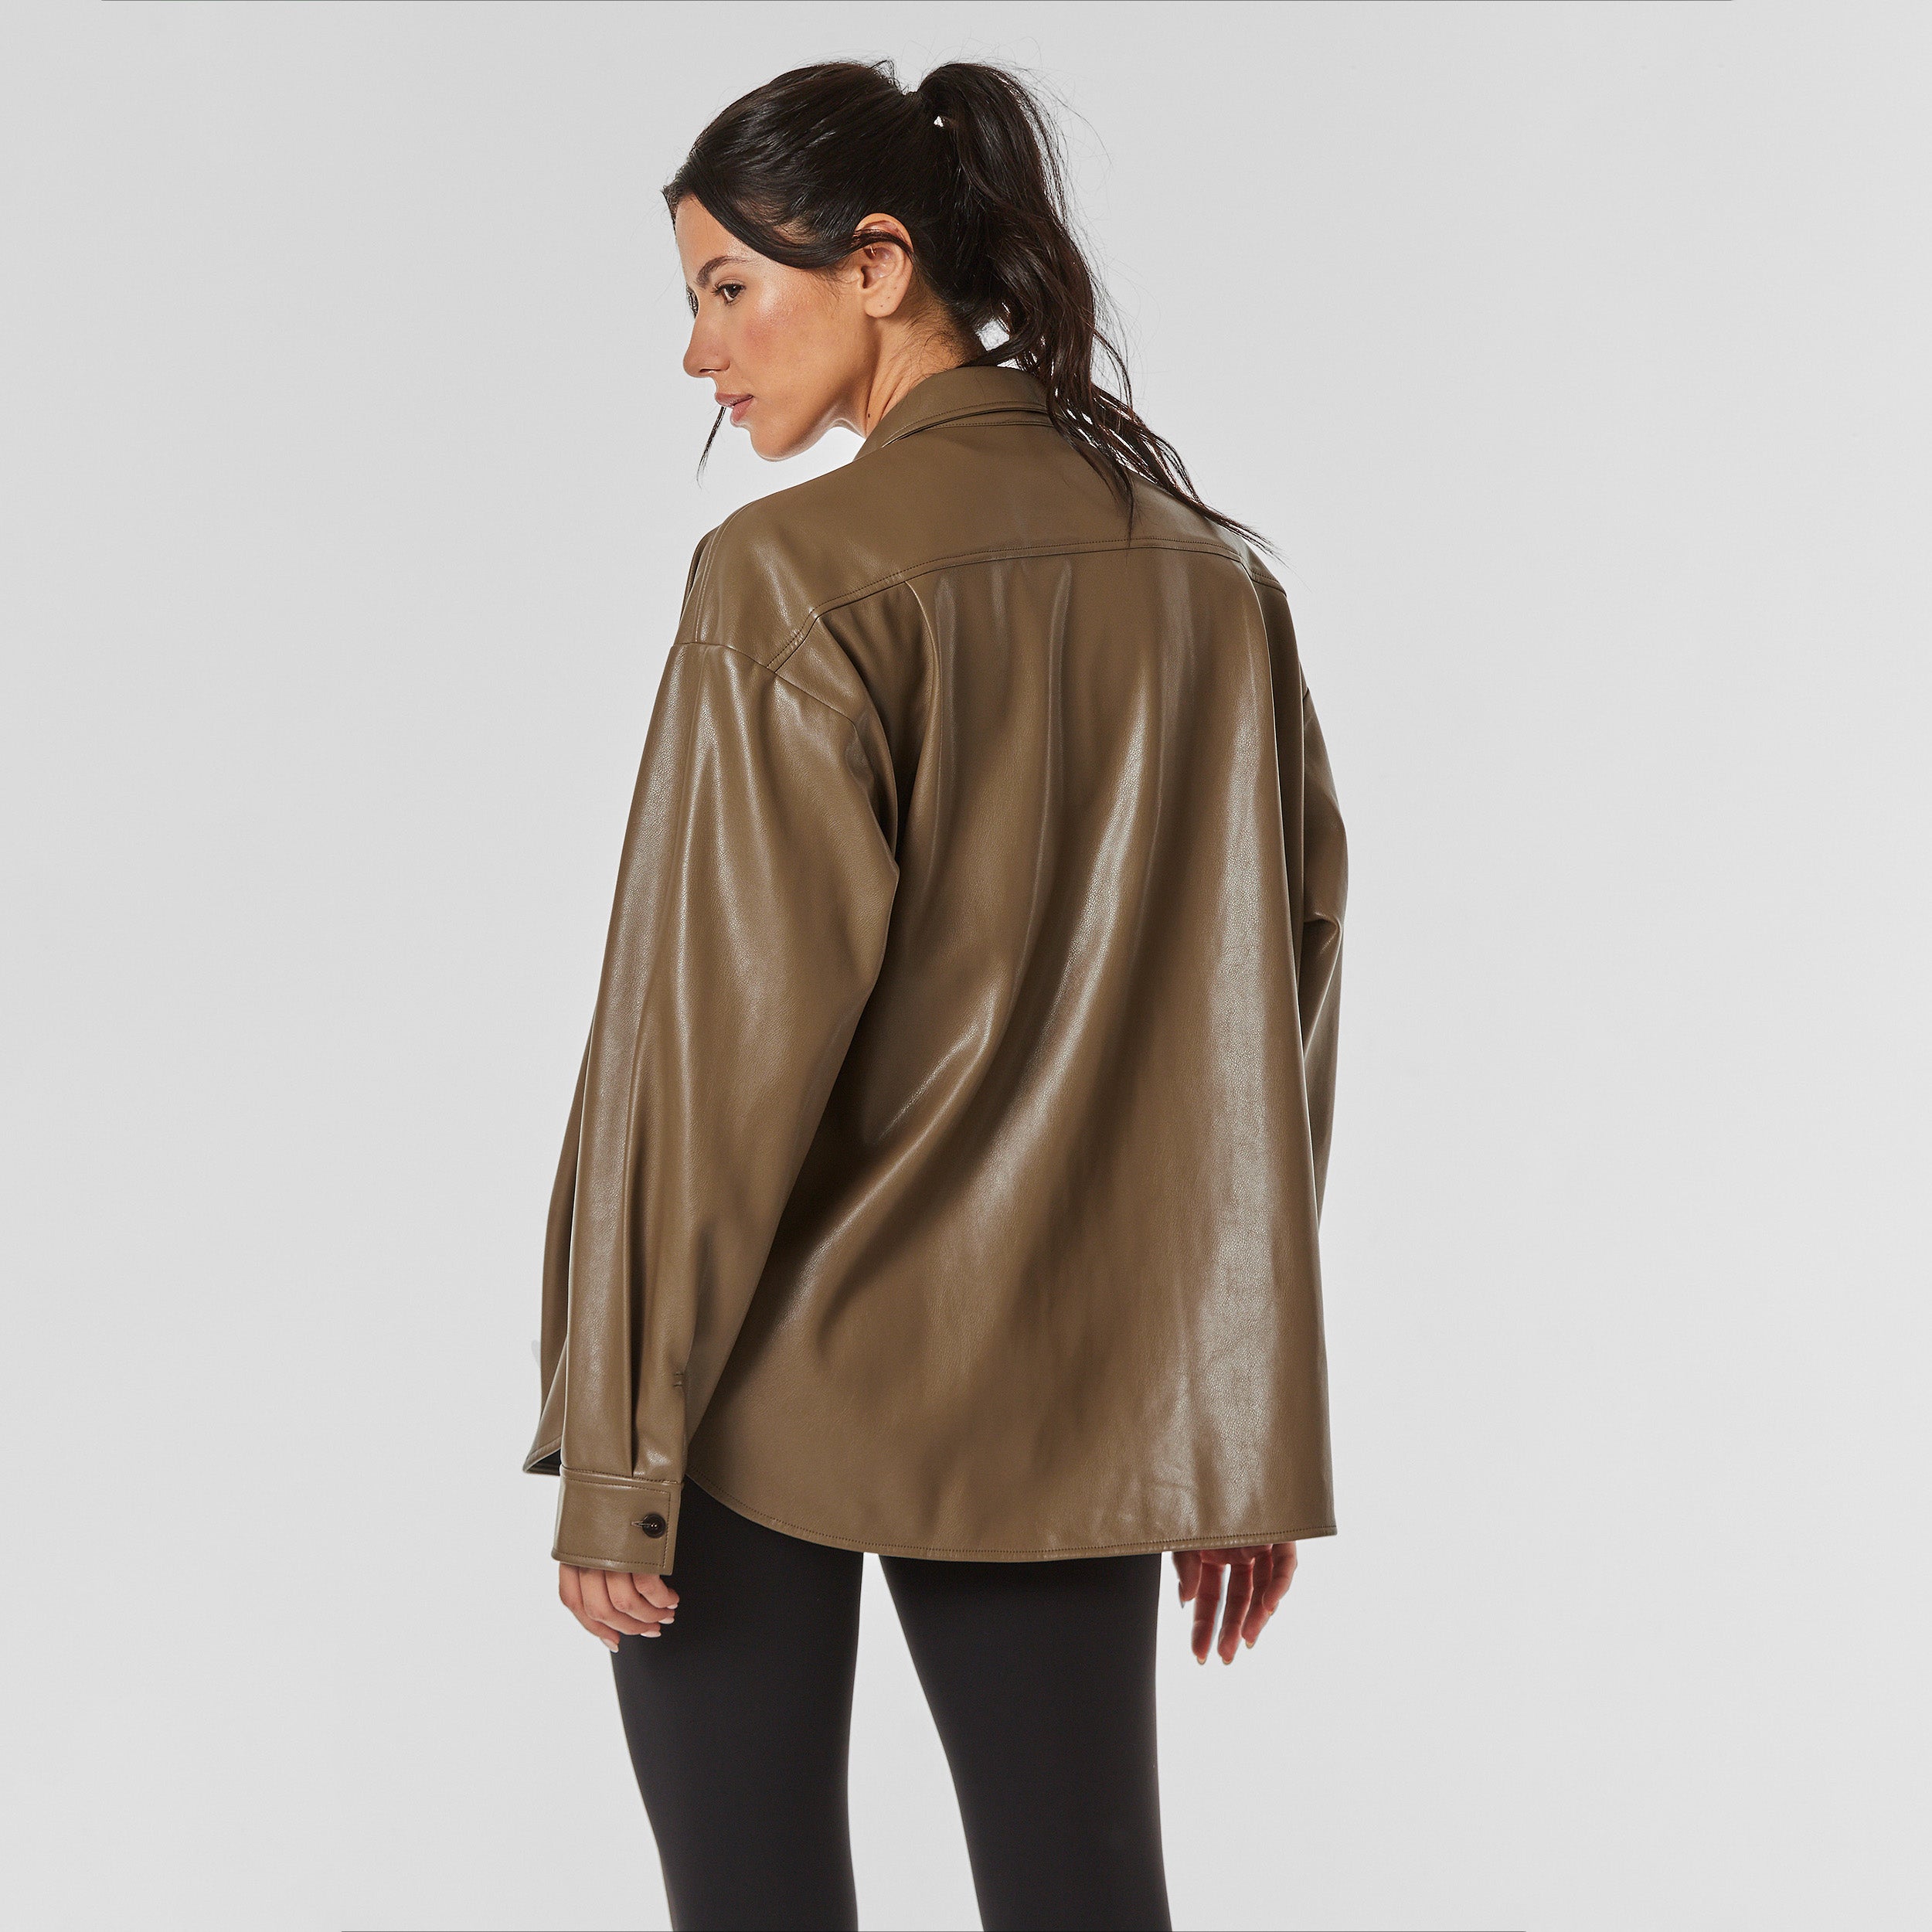 Rear view of woman wearing brown faux leather oversized shirt jacket.